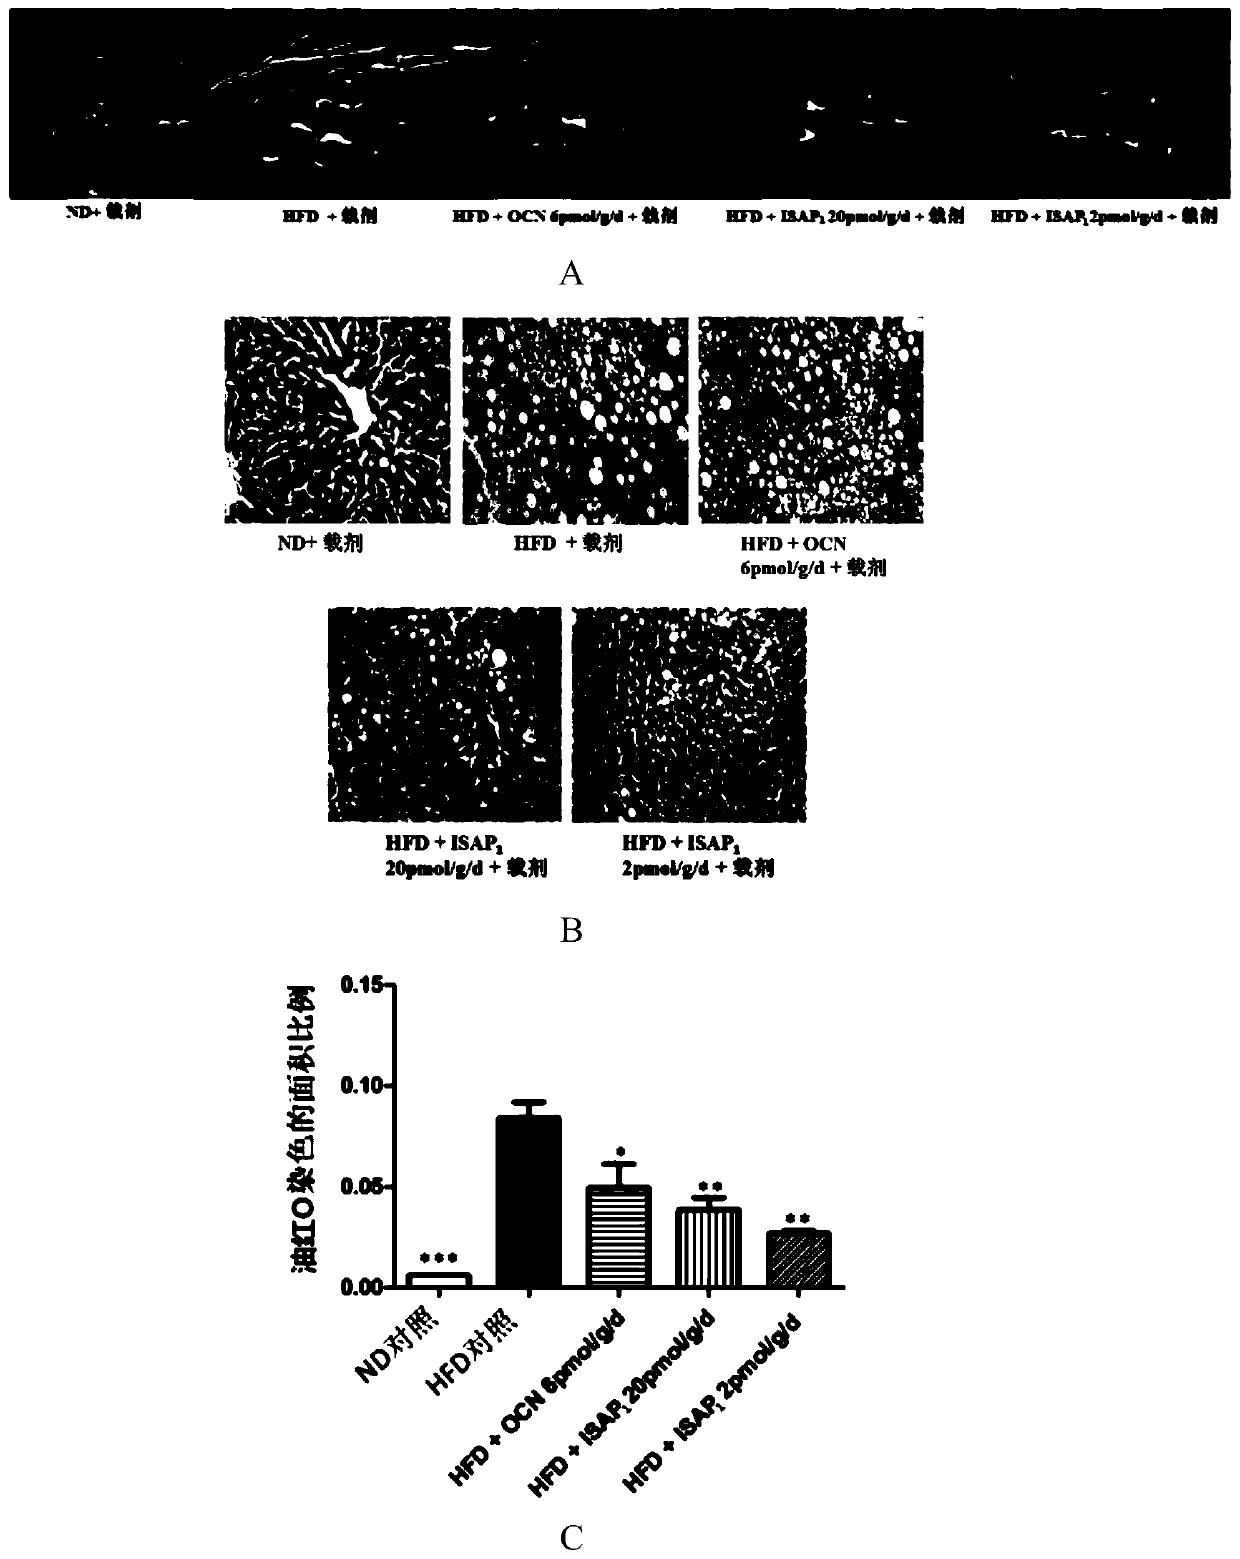 Polypeptides regulating energy metabolism and uses thereof